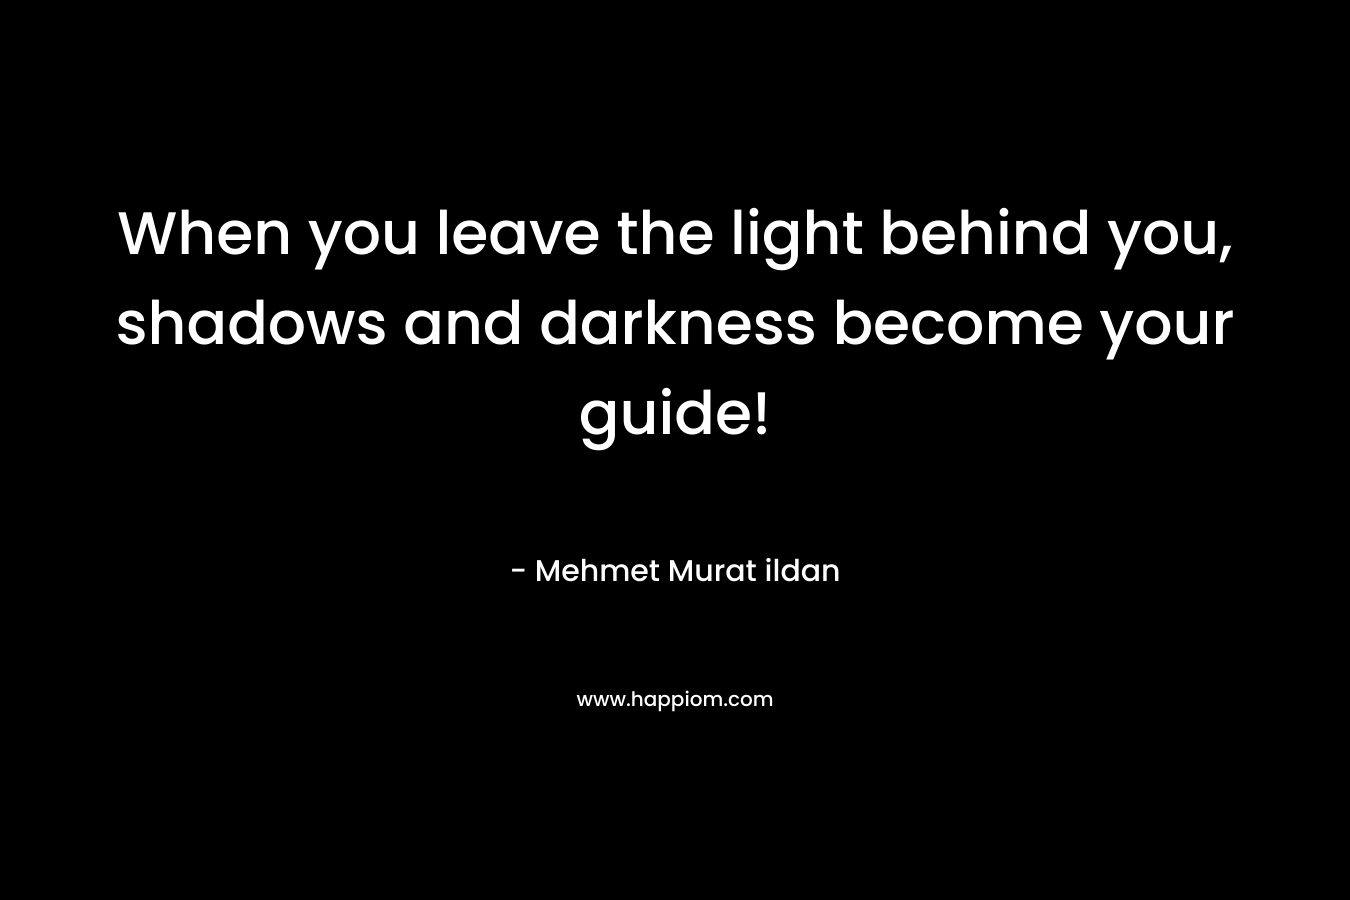 When you leave the light behind you, shadows and darkness become your guide! – Mehmet Murat ildan